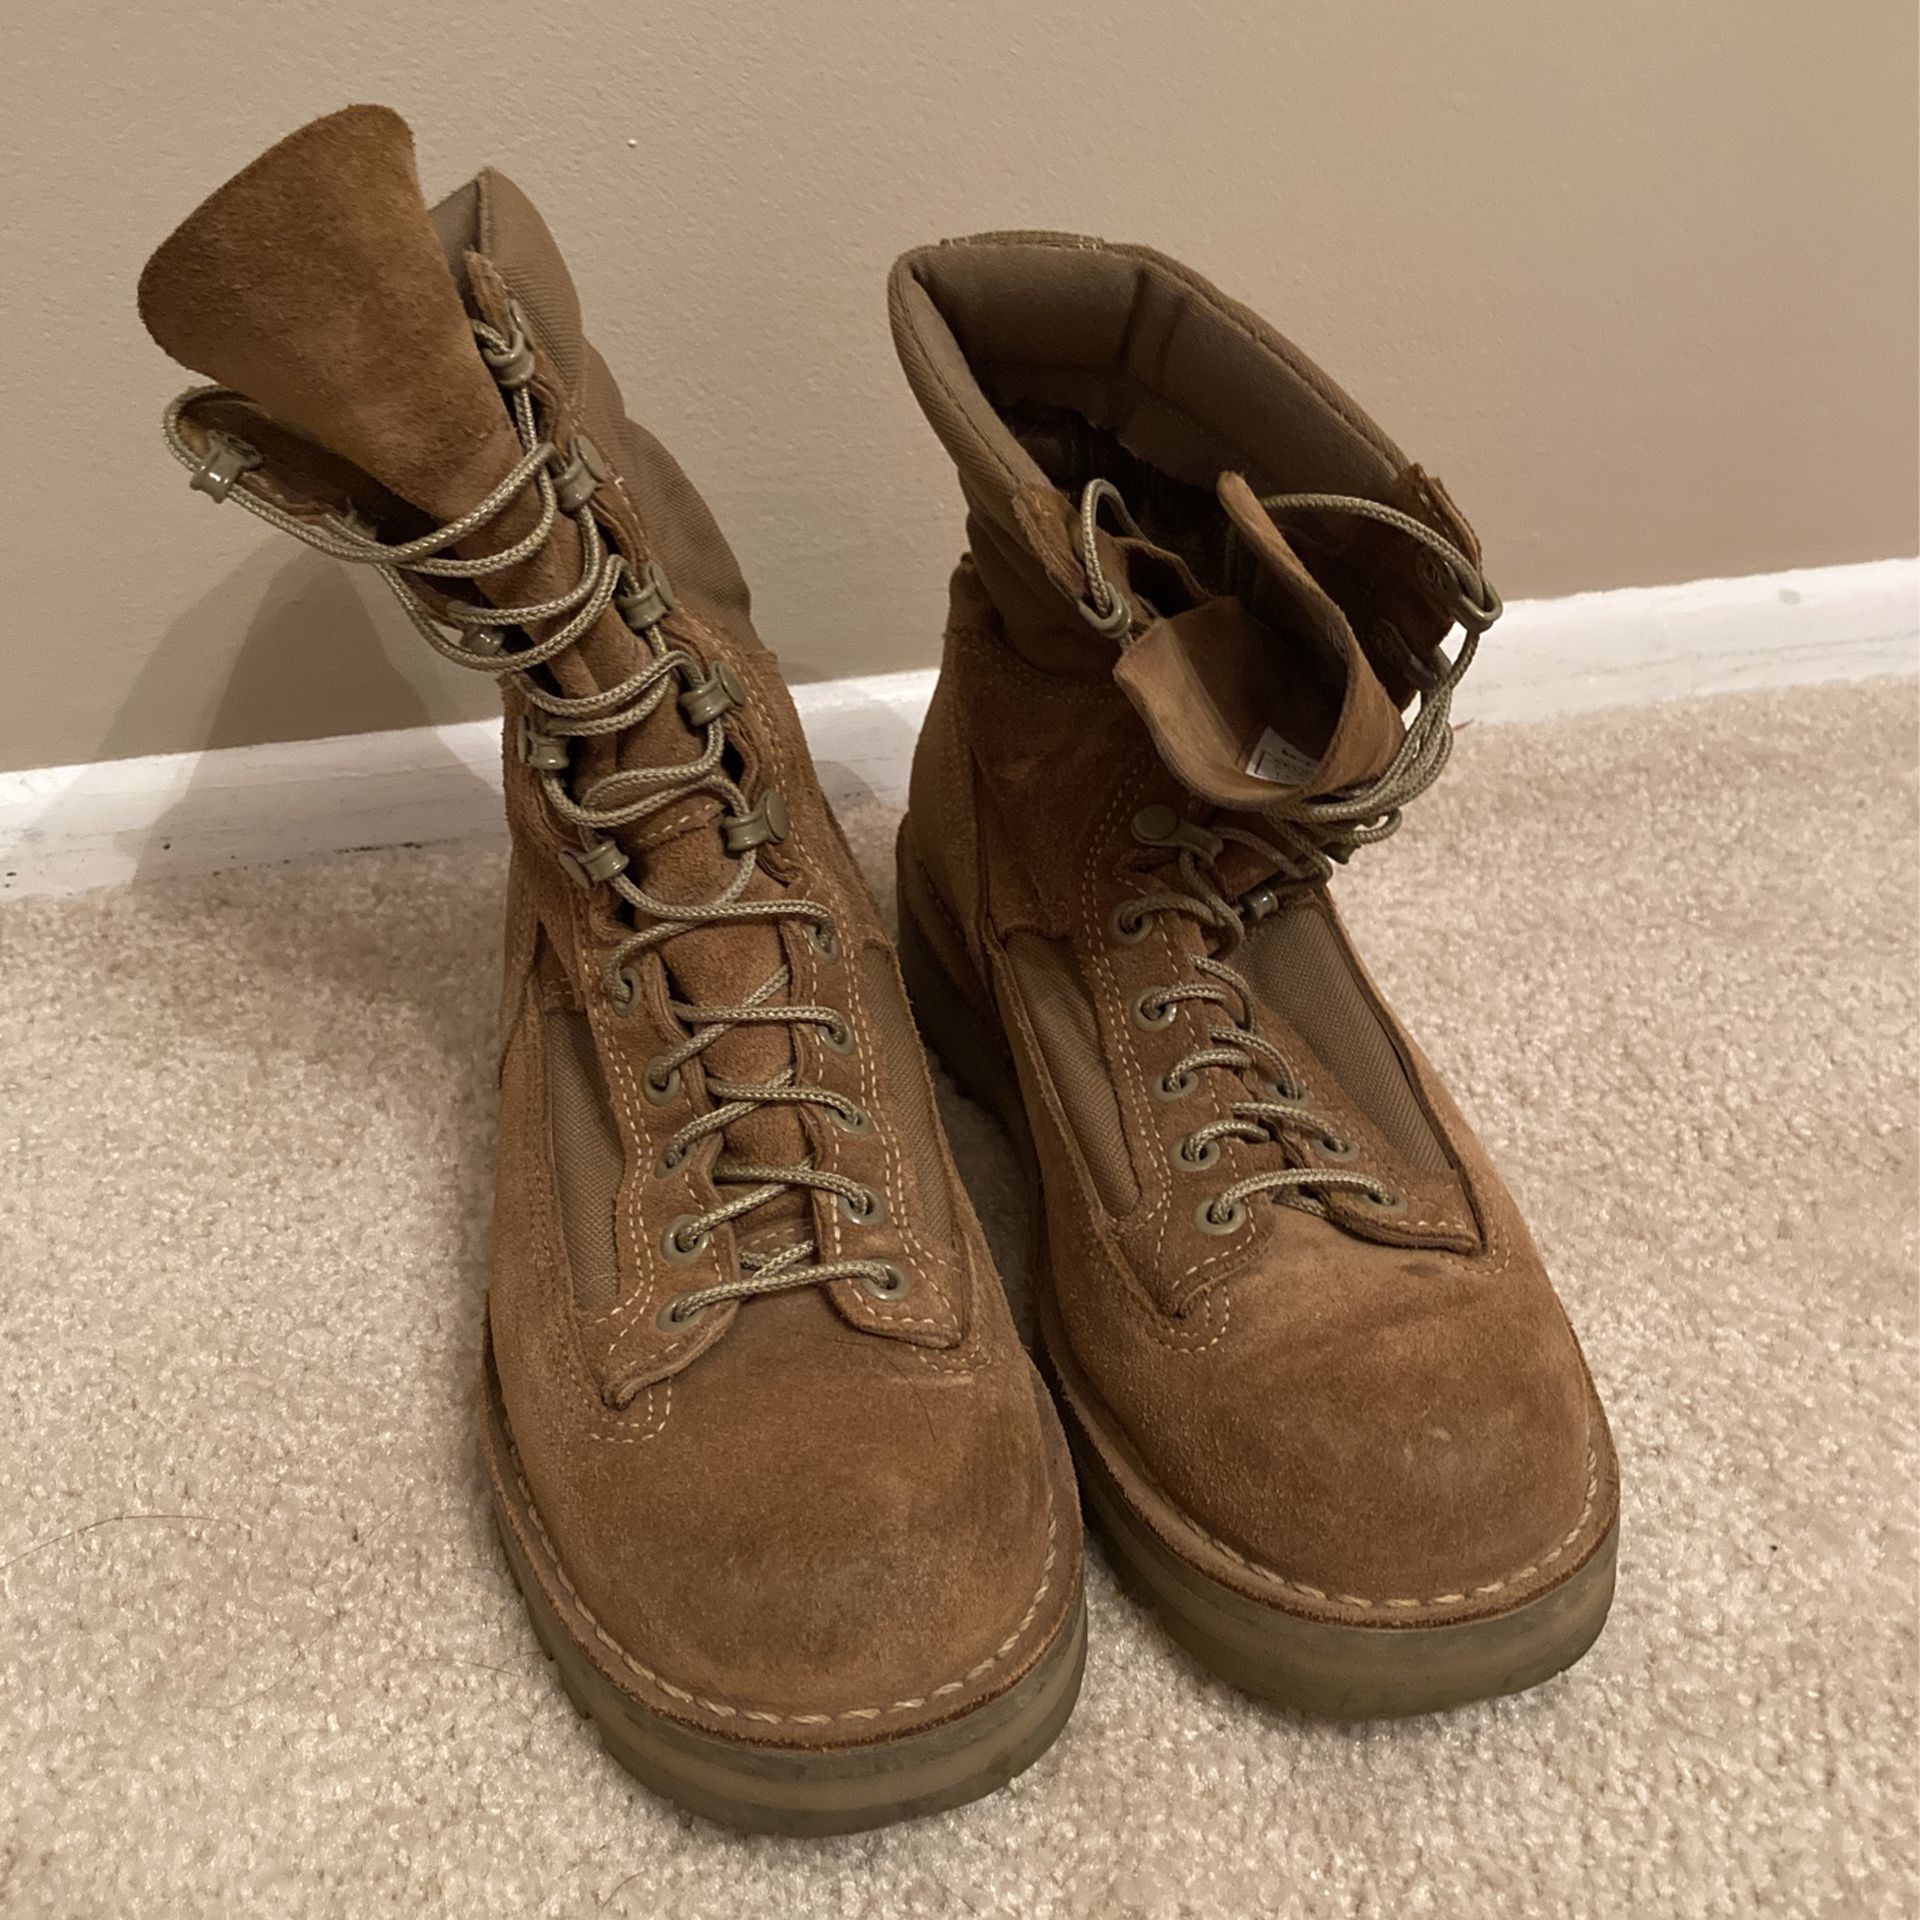 Danner Boots, Womens Size 9.5 